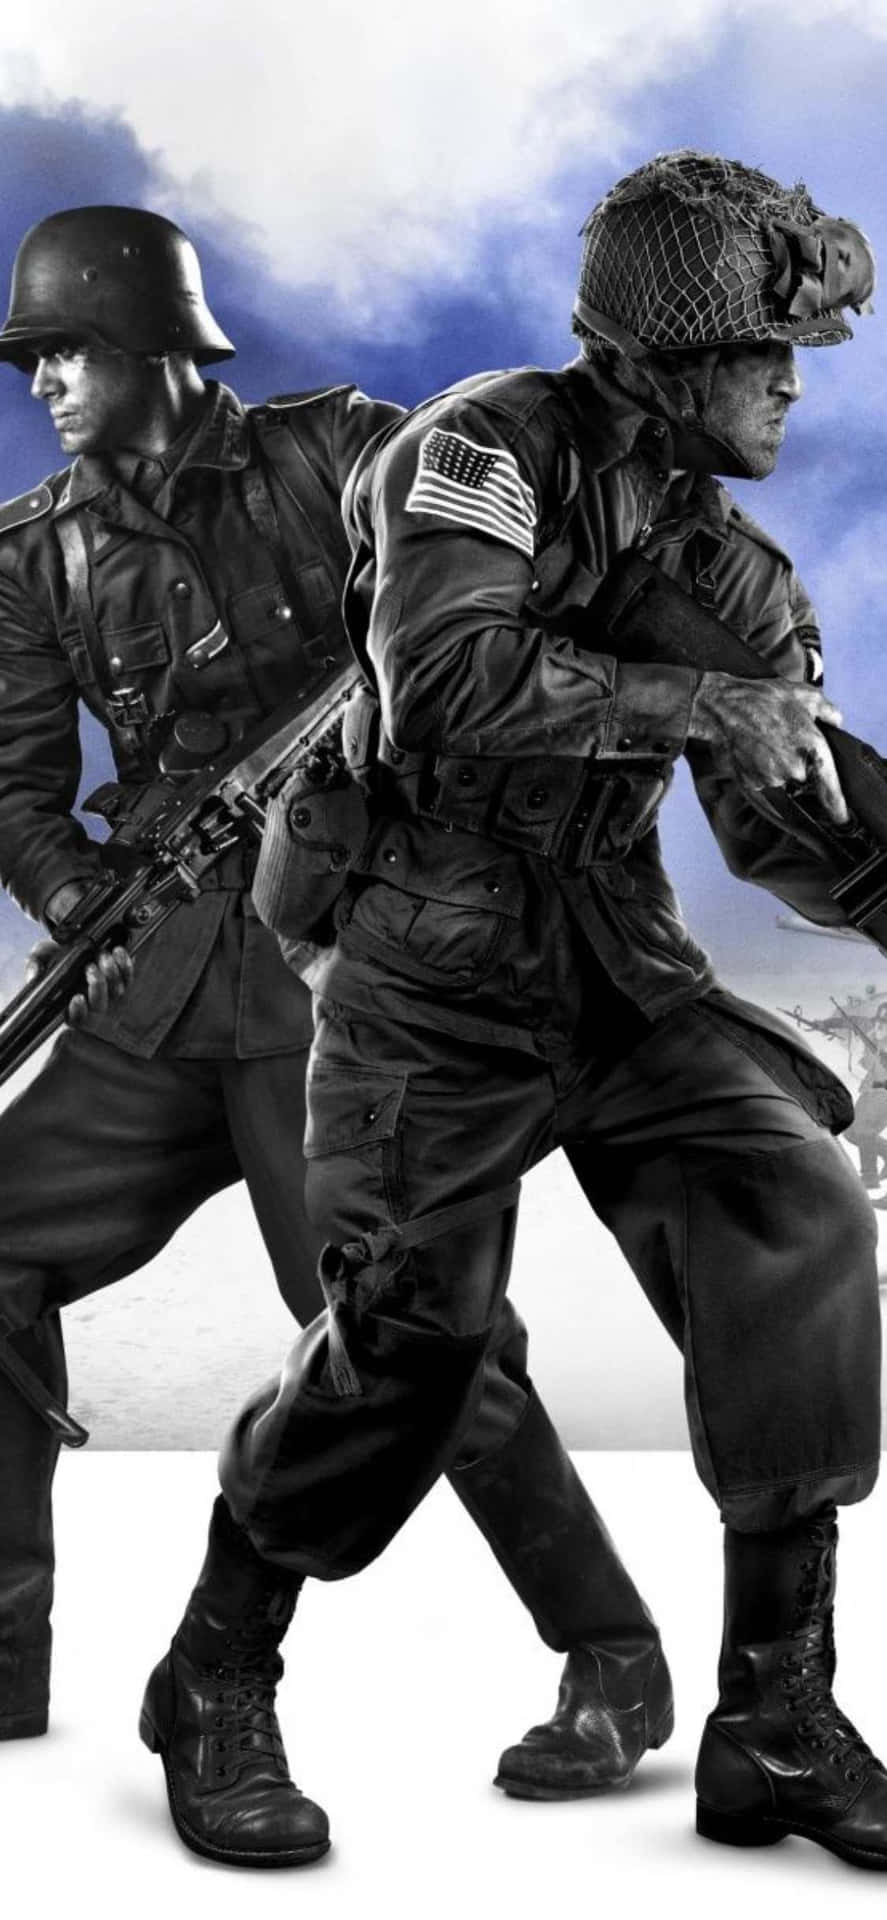 Iphone Xs Company Of Heroes 2 Background Back To Back